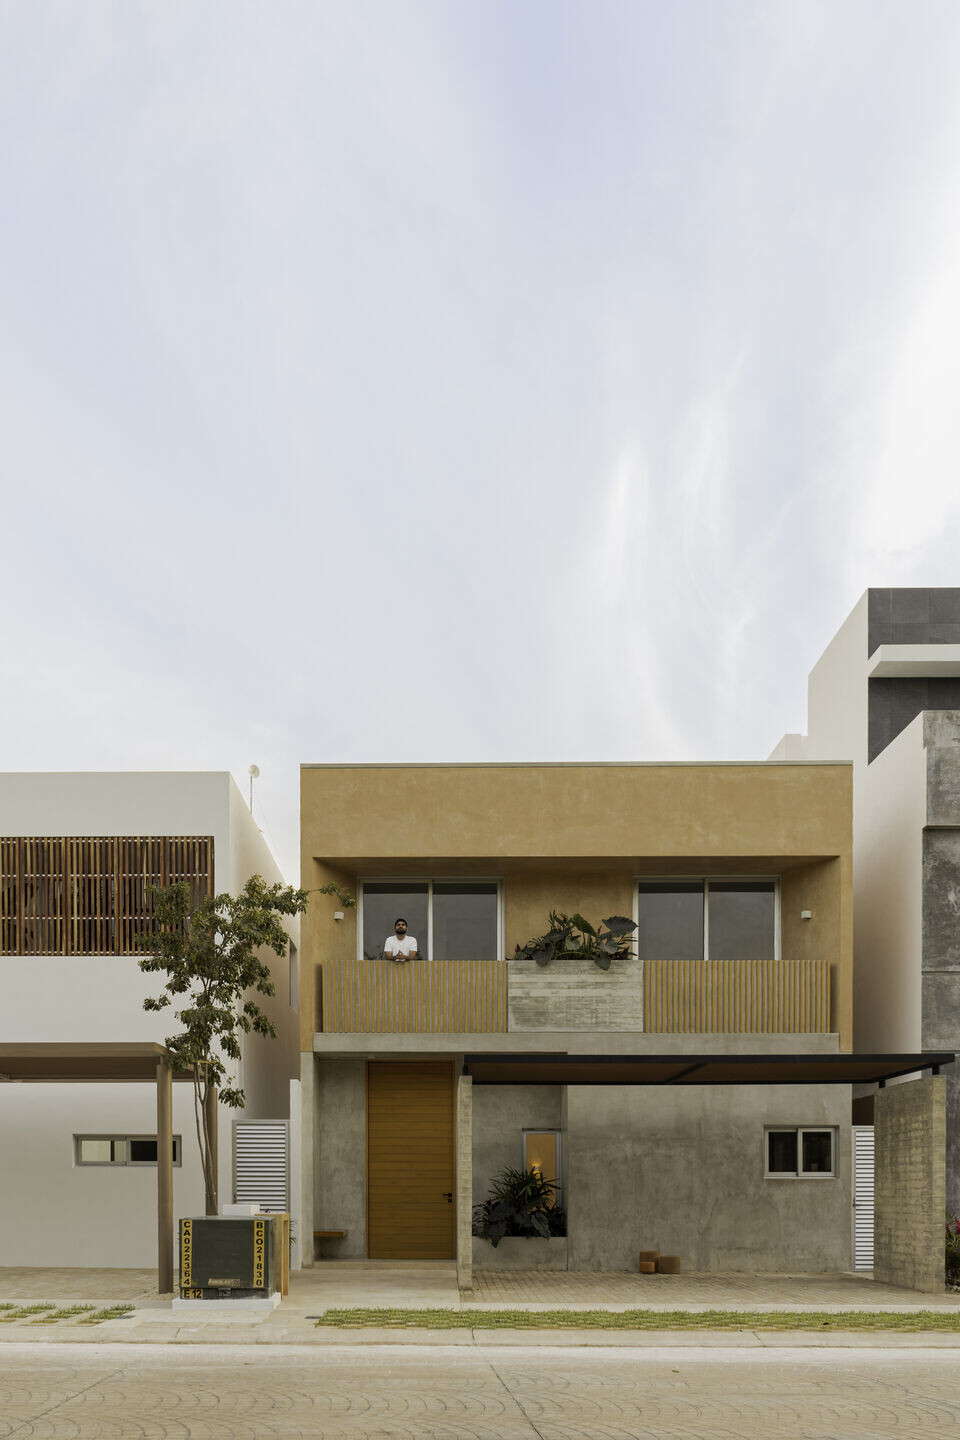 photo_credit © Jonatan Smith / Paola Márquez | MAS arquitectura. All rights reserved.